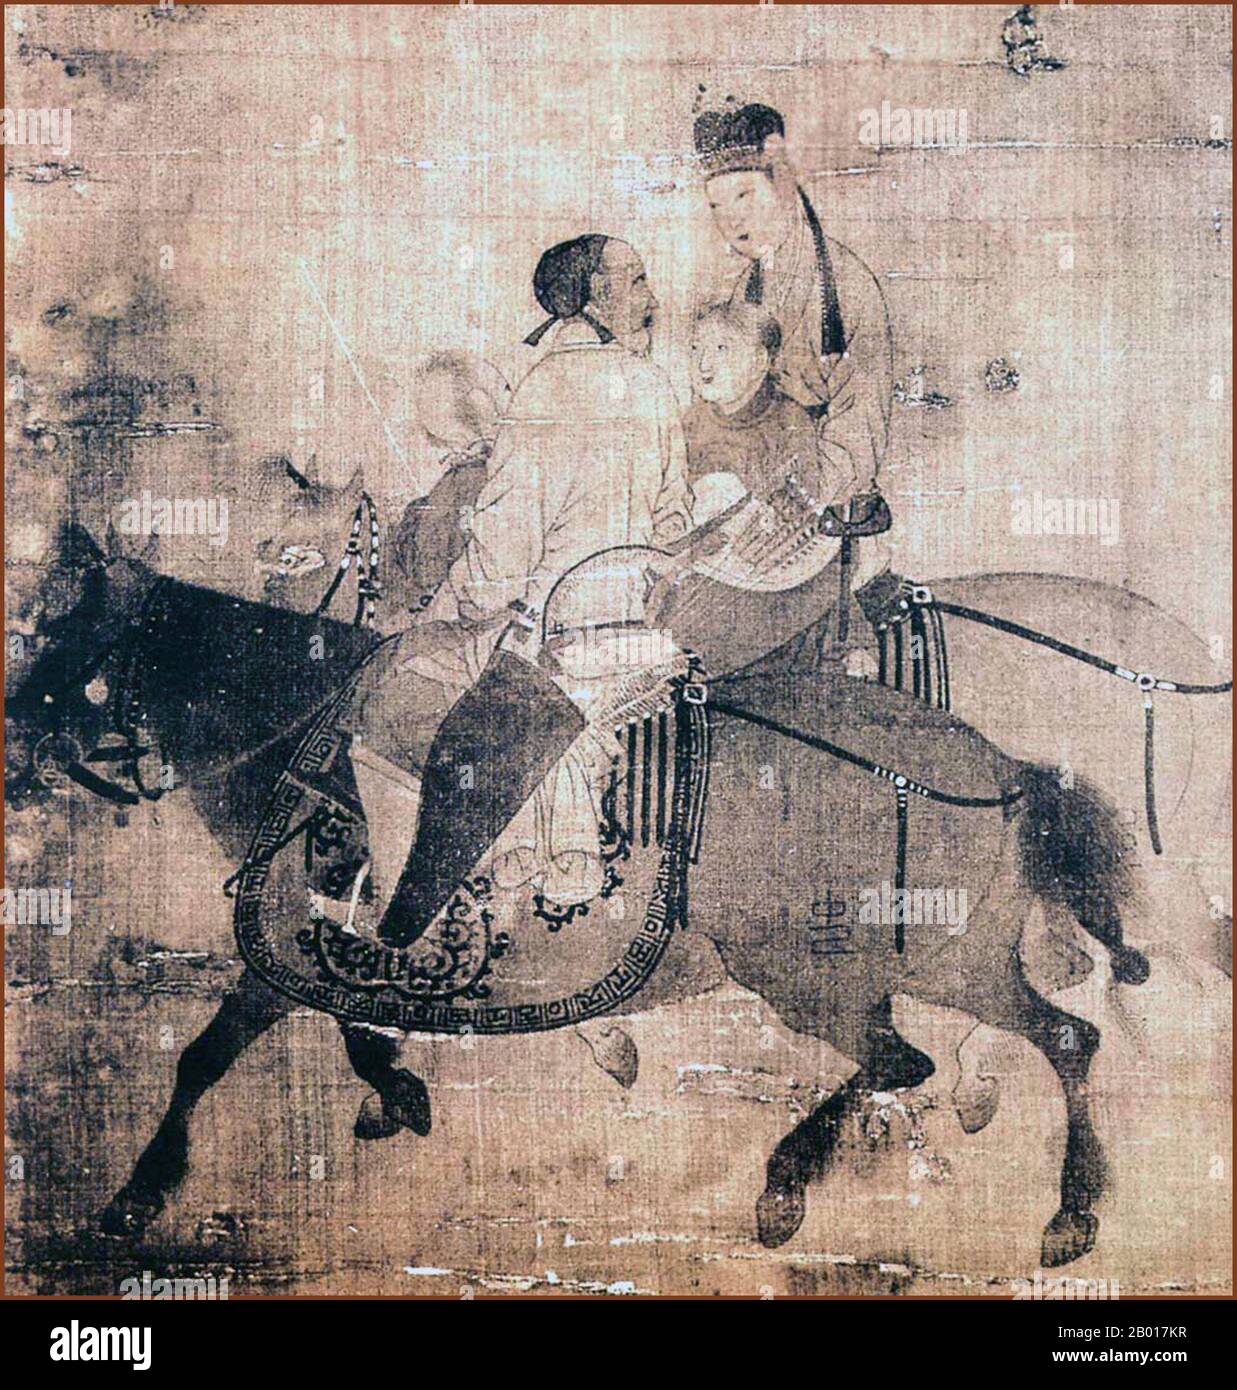 China: 'Cai Wenji Returns to Her Homeland'. Anonymous painting of Cai Wenji and her Xiongnu husband Liu Bao, Southern Song Dynasty (1127-1279).  Cai Wenji was born shortly before 178 CE in what is now Qi County, Kaifeng, Henan. In 195, the chaos after Chancellor Dong Zhuo's death brought Xiongnu nomads into the Chinese capital and Cai Wenji was taken captive to the northern lands. During her captivity, she became the wife of the Xiongnu chieftain Liu Bao and bore him two sons. It was not until twelve years later that Cao Cao, the new Chancellor of Han, ransomed her in her father's name. Stock Photo